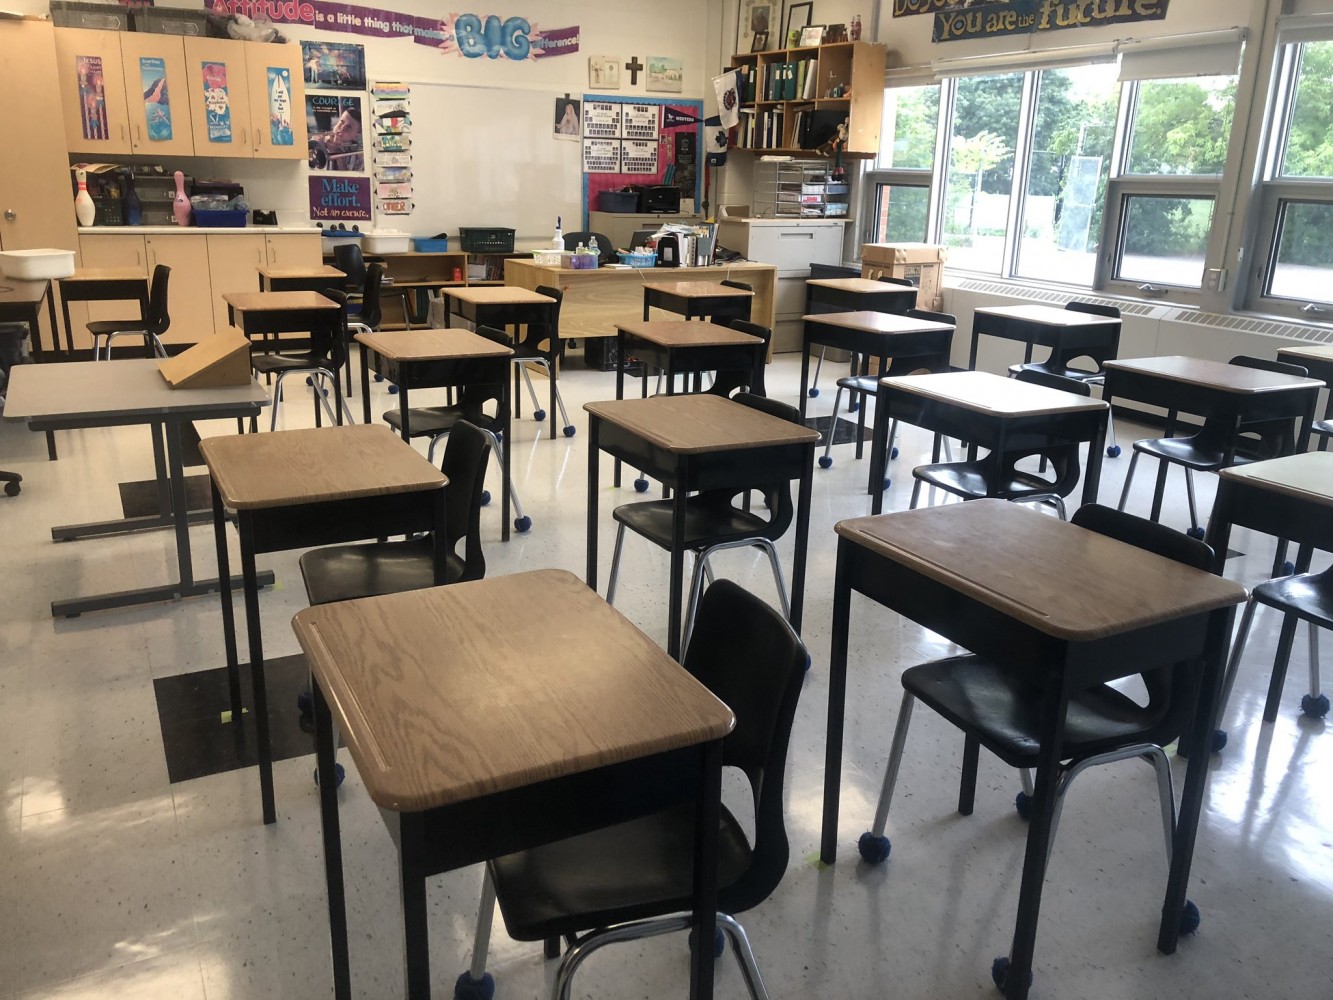 Peel Catholic board has 26% of Ontario’s school closures – future of in-class learning uncertain